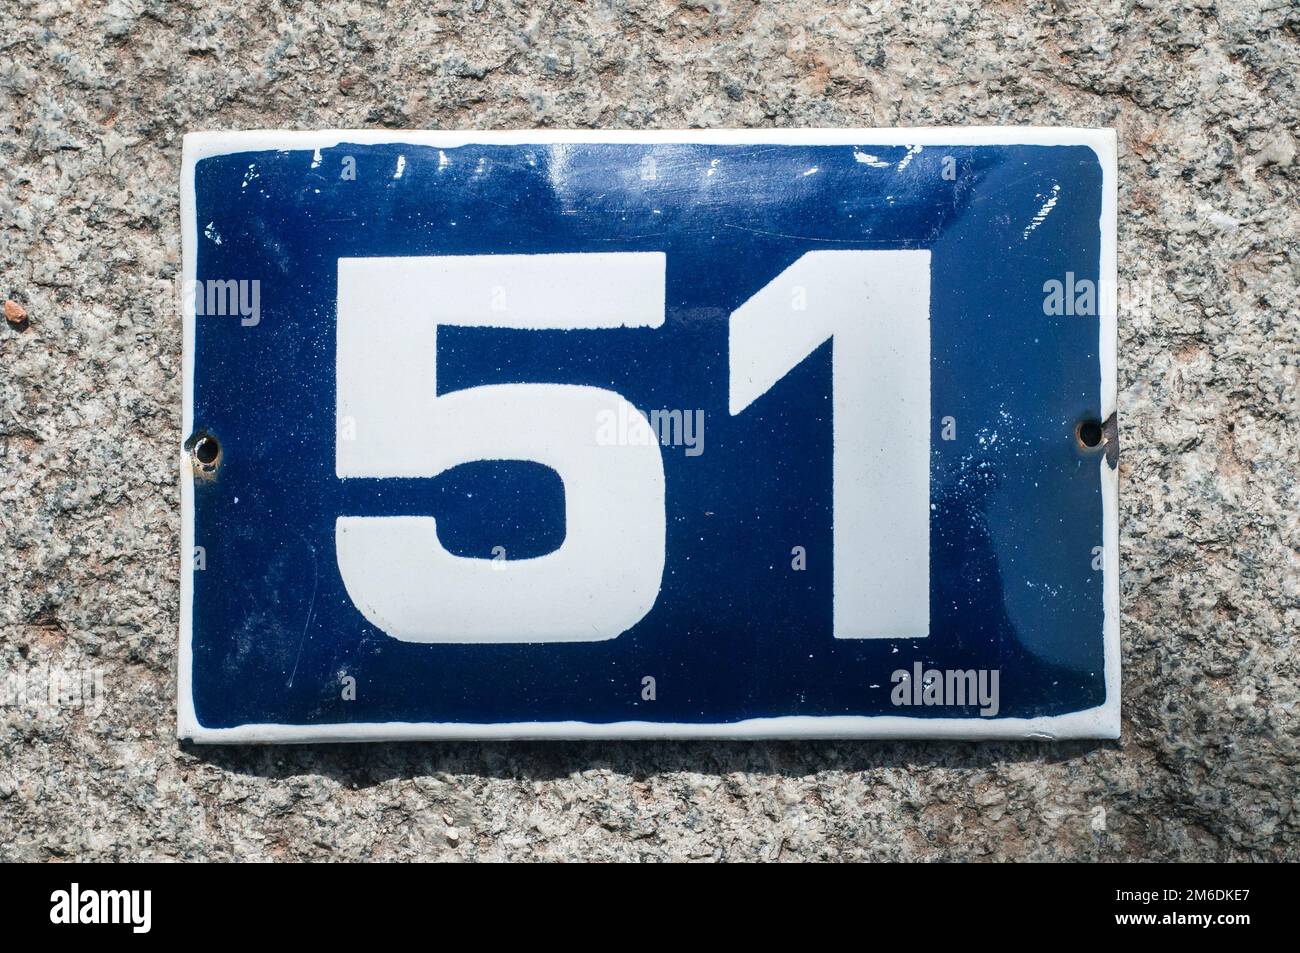 Weathered grunge square metal enameled plate of number of street address with number 51 closeup Stock Photo